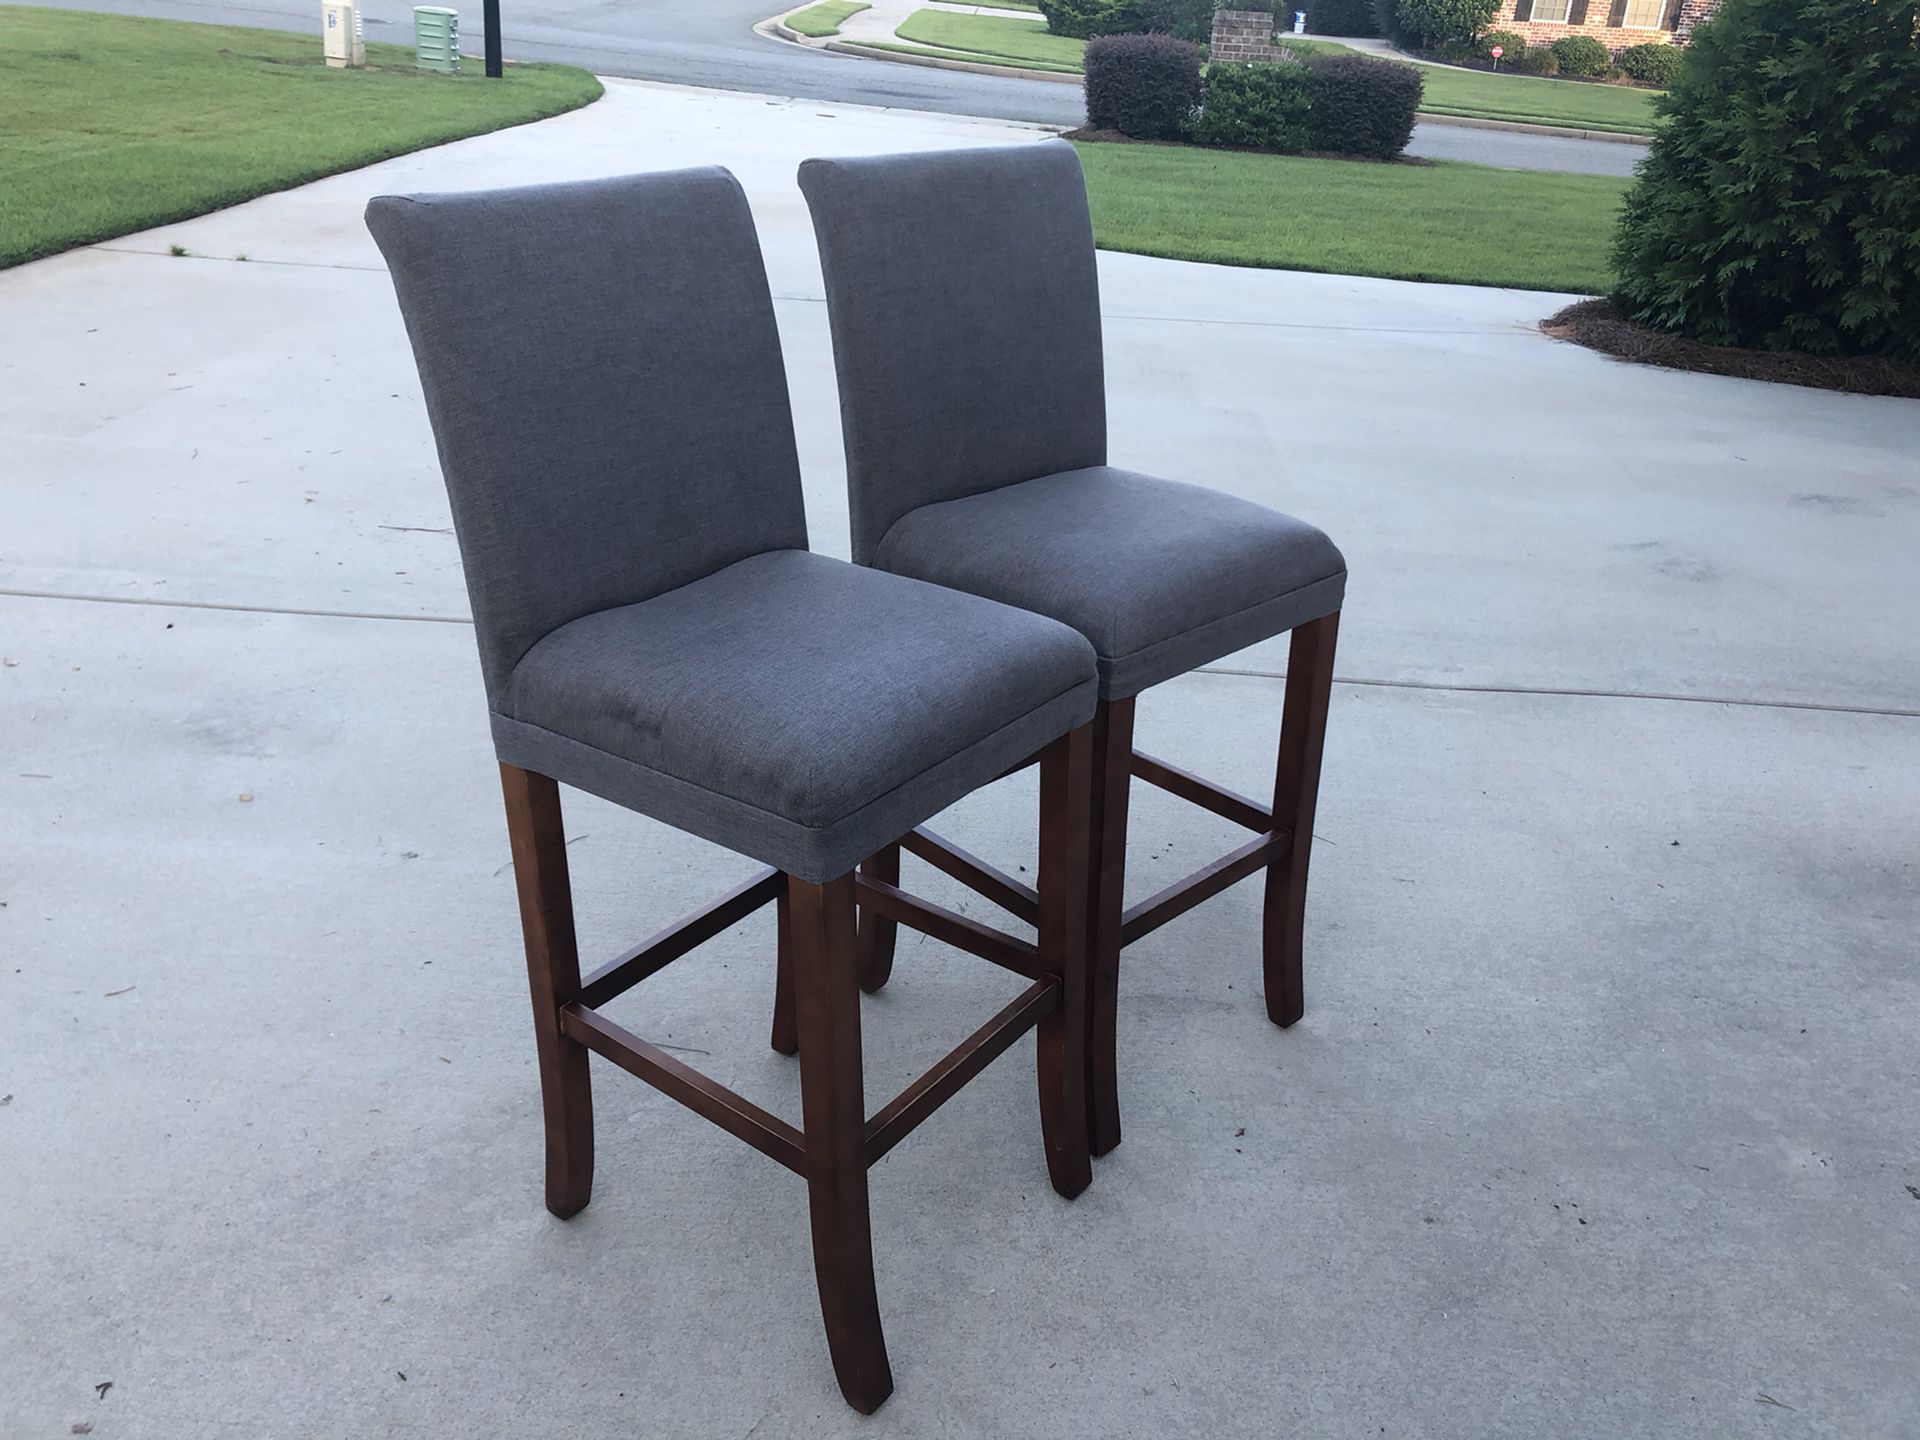 Two 29” Bar Stools from At Home